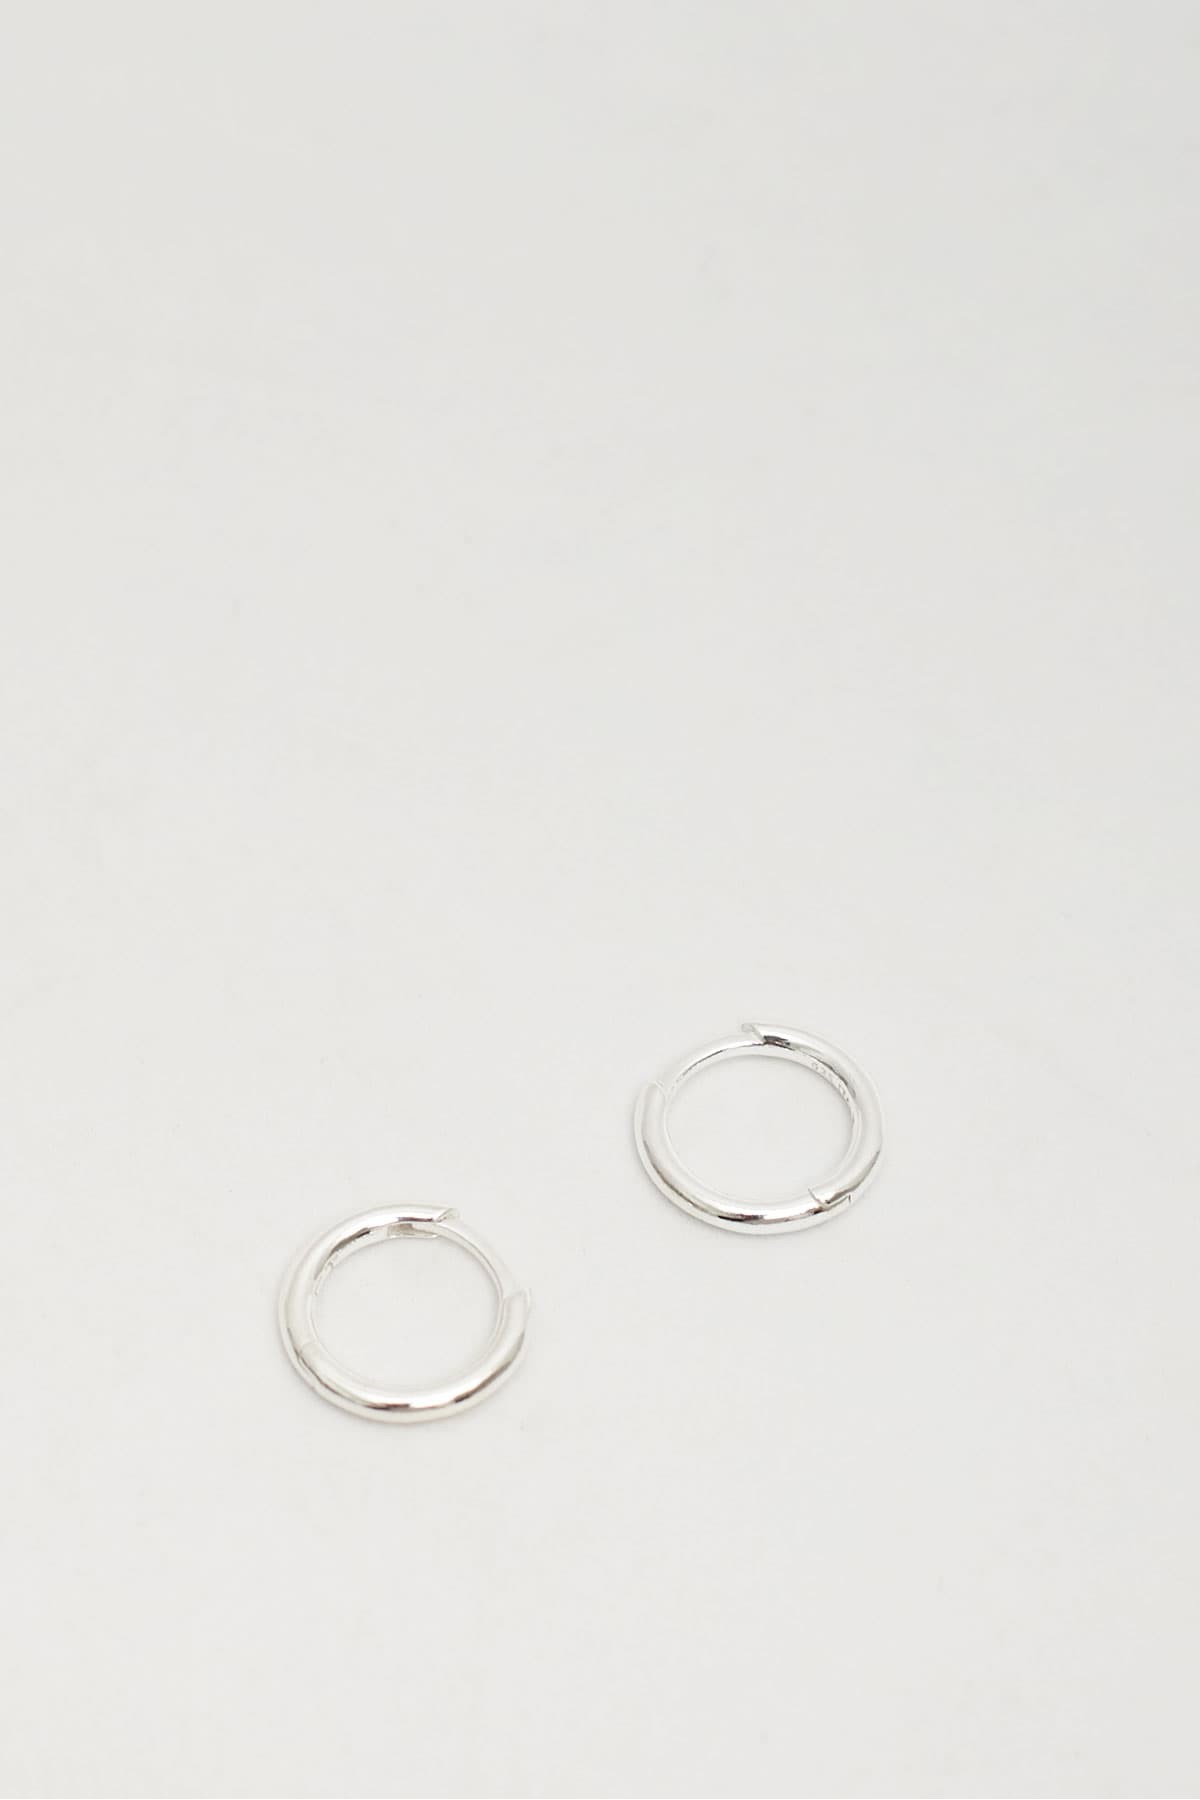 HATTON LABS STERLING SILVER SMALL ROUND HOOP EARRINGS IAMNUE